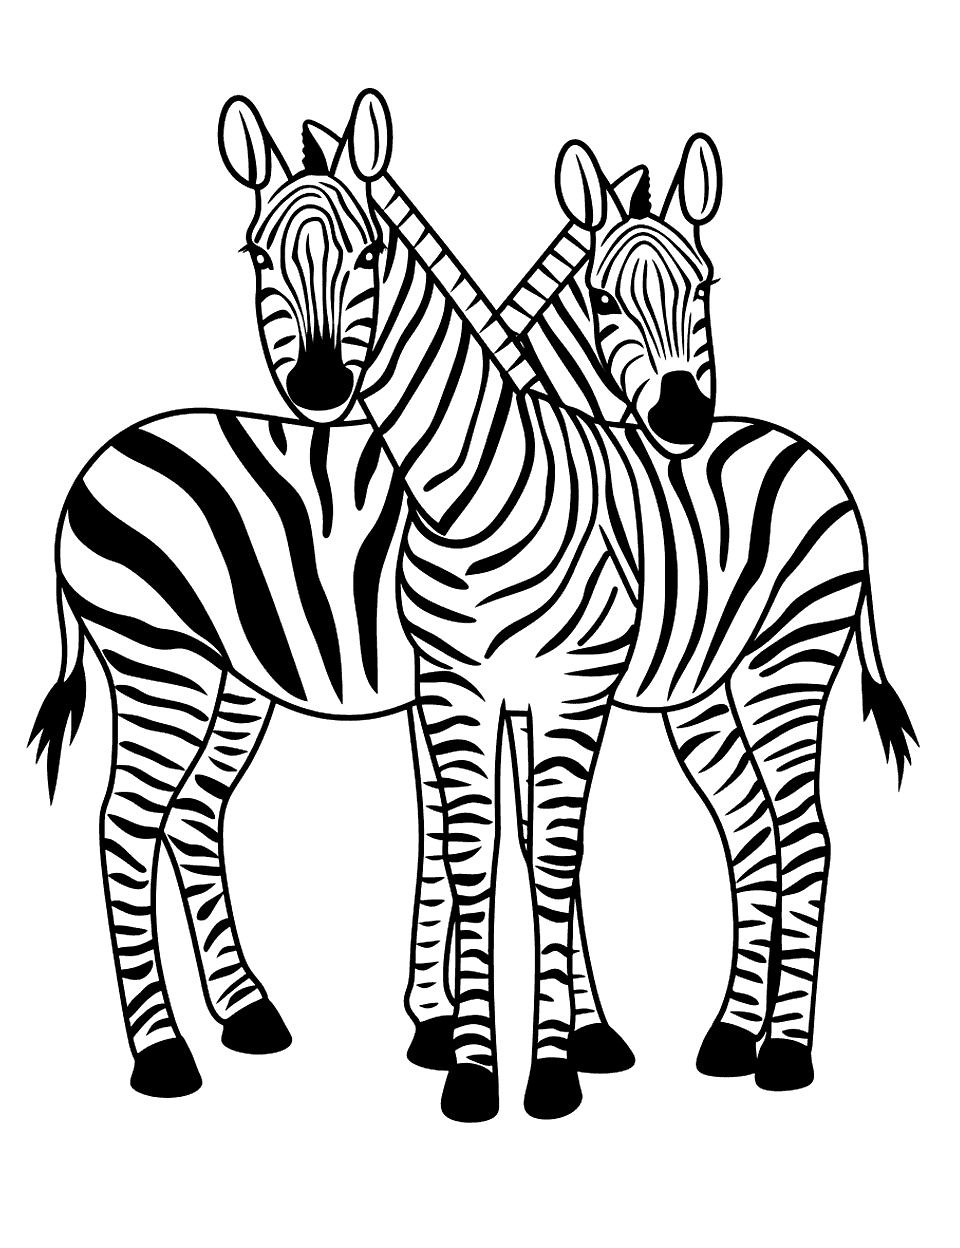 Two Zebras Crossing Tails Zebra Coloring Page - Two zebras standing side by side, their heads crossed.